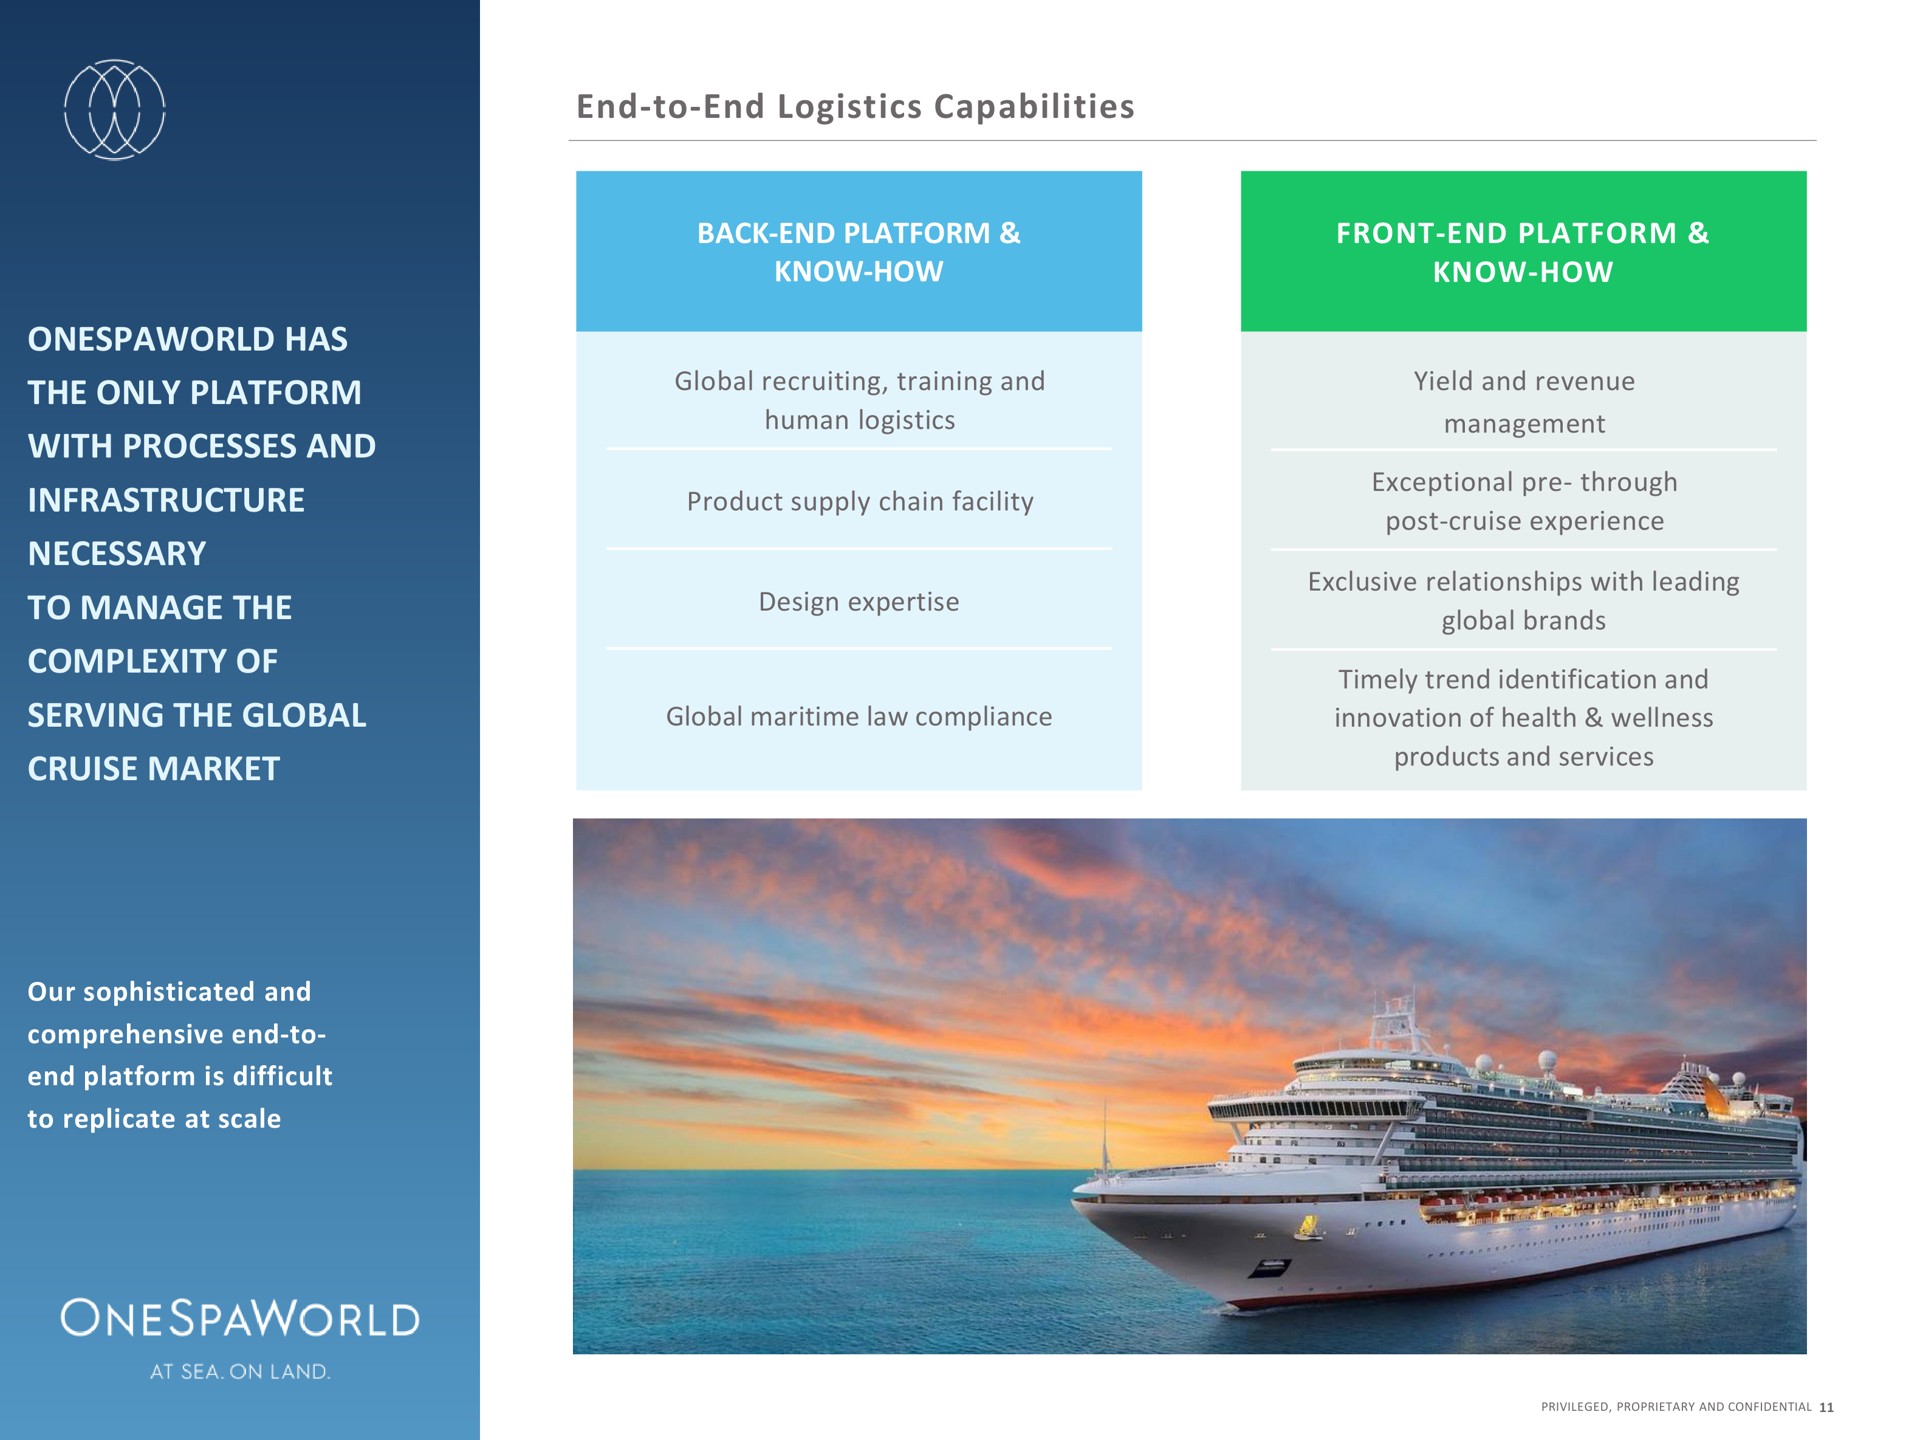 end to end logistics capabilities back end platform know how front end platform know how has the only platform with processes and infrastructure necessary to manage the complexity of serving the global cruise market end to end | OnesSpaWorld